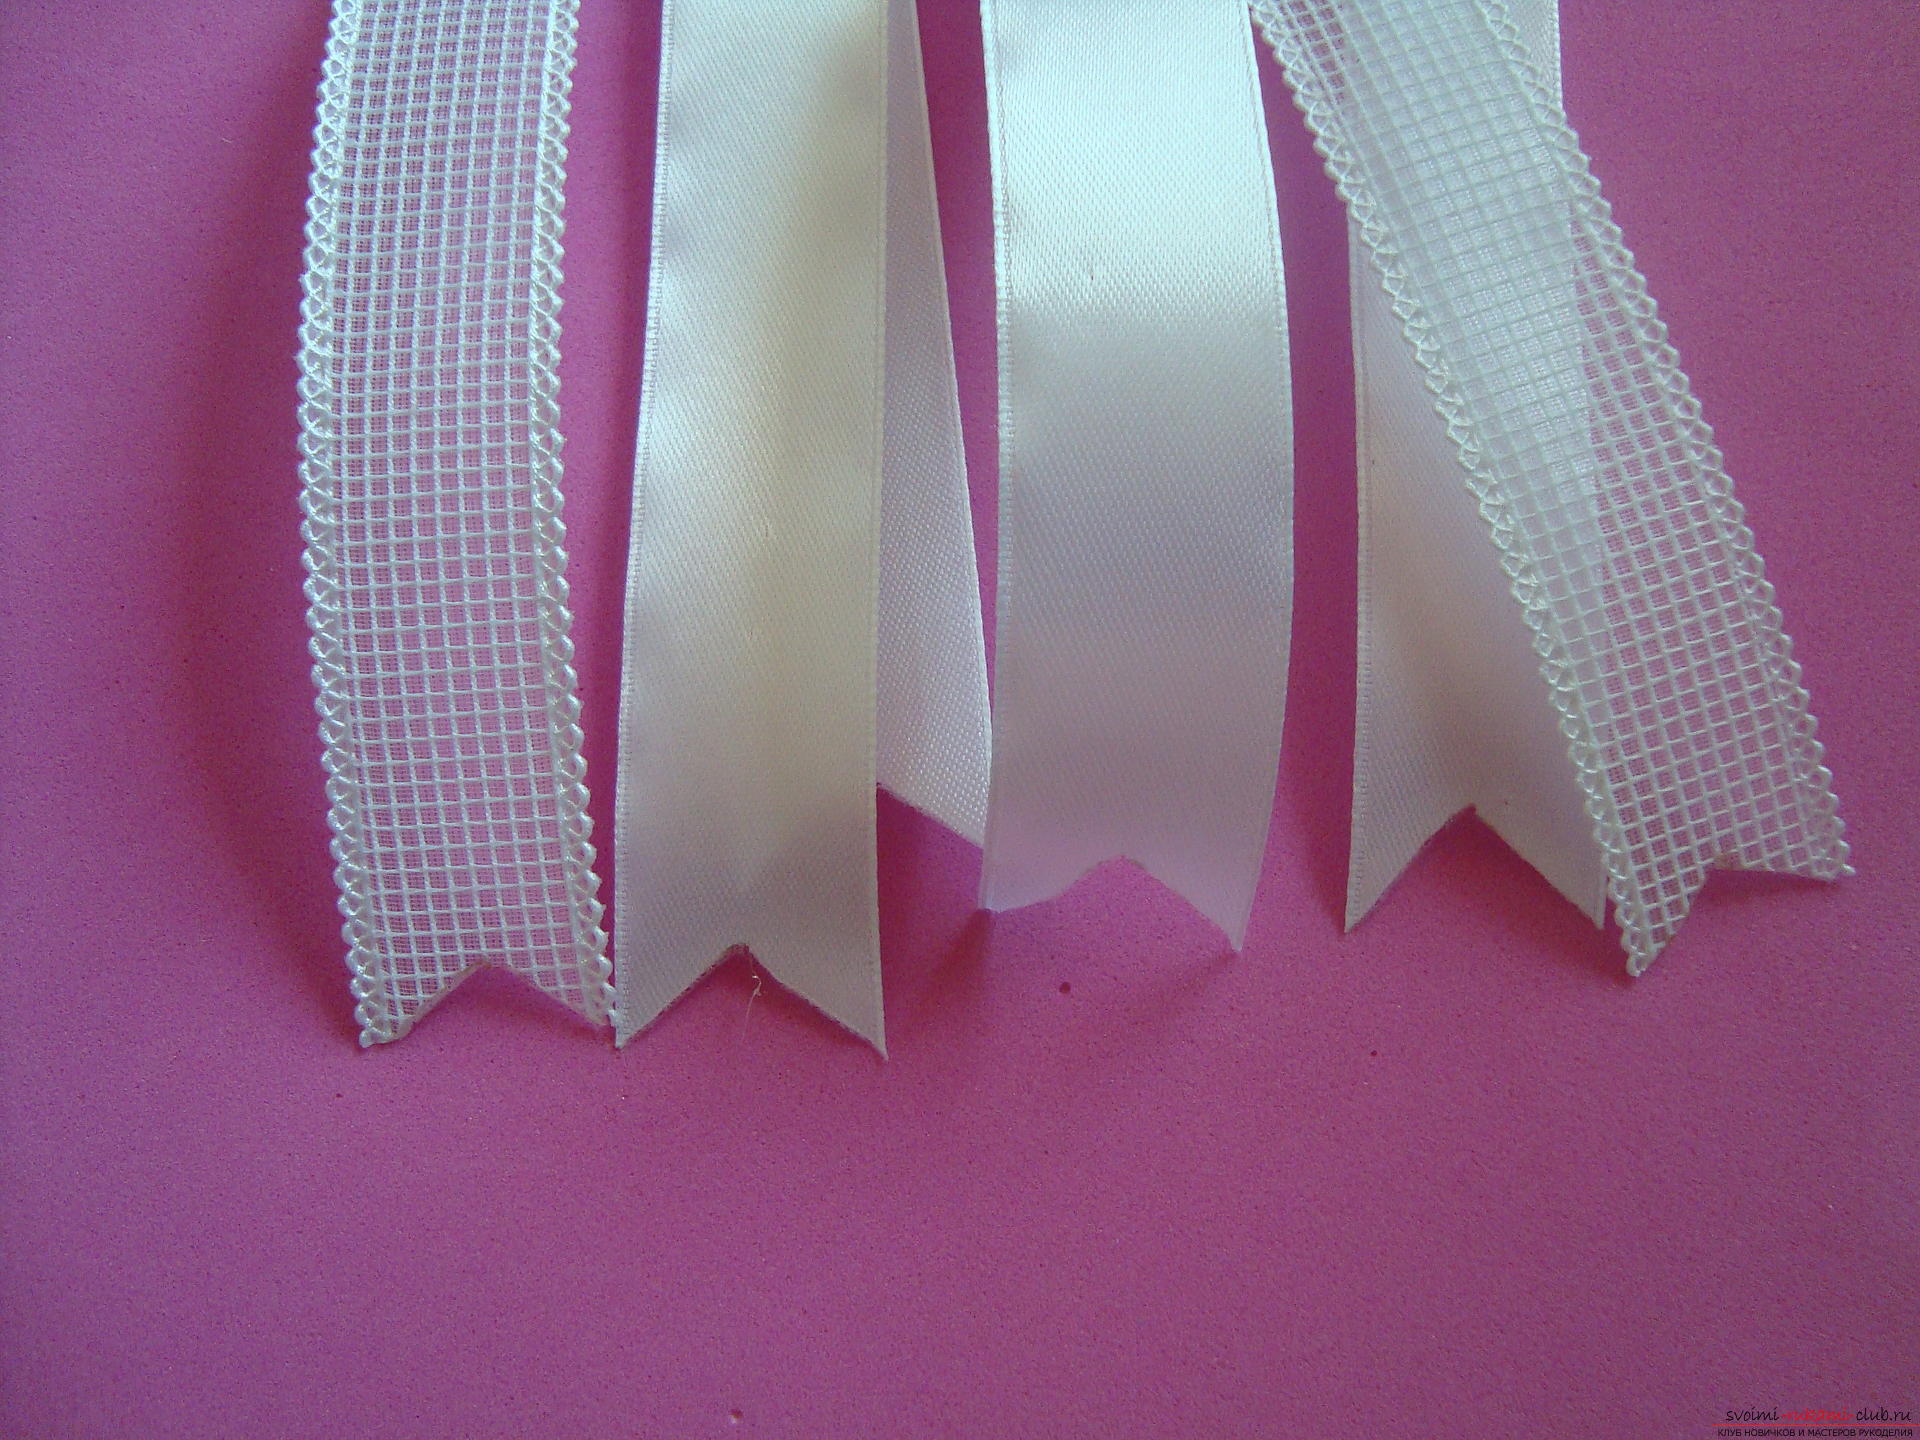 Step-by-step guide to making bows by September 1 for schoolgirls describing the steps and photos. Photo №4